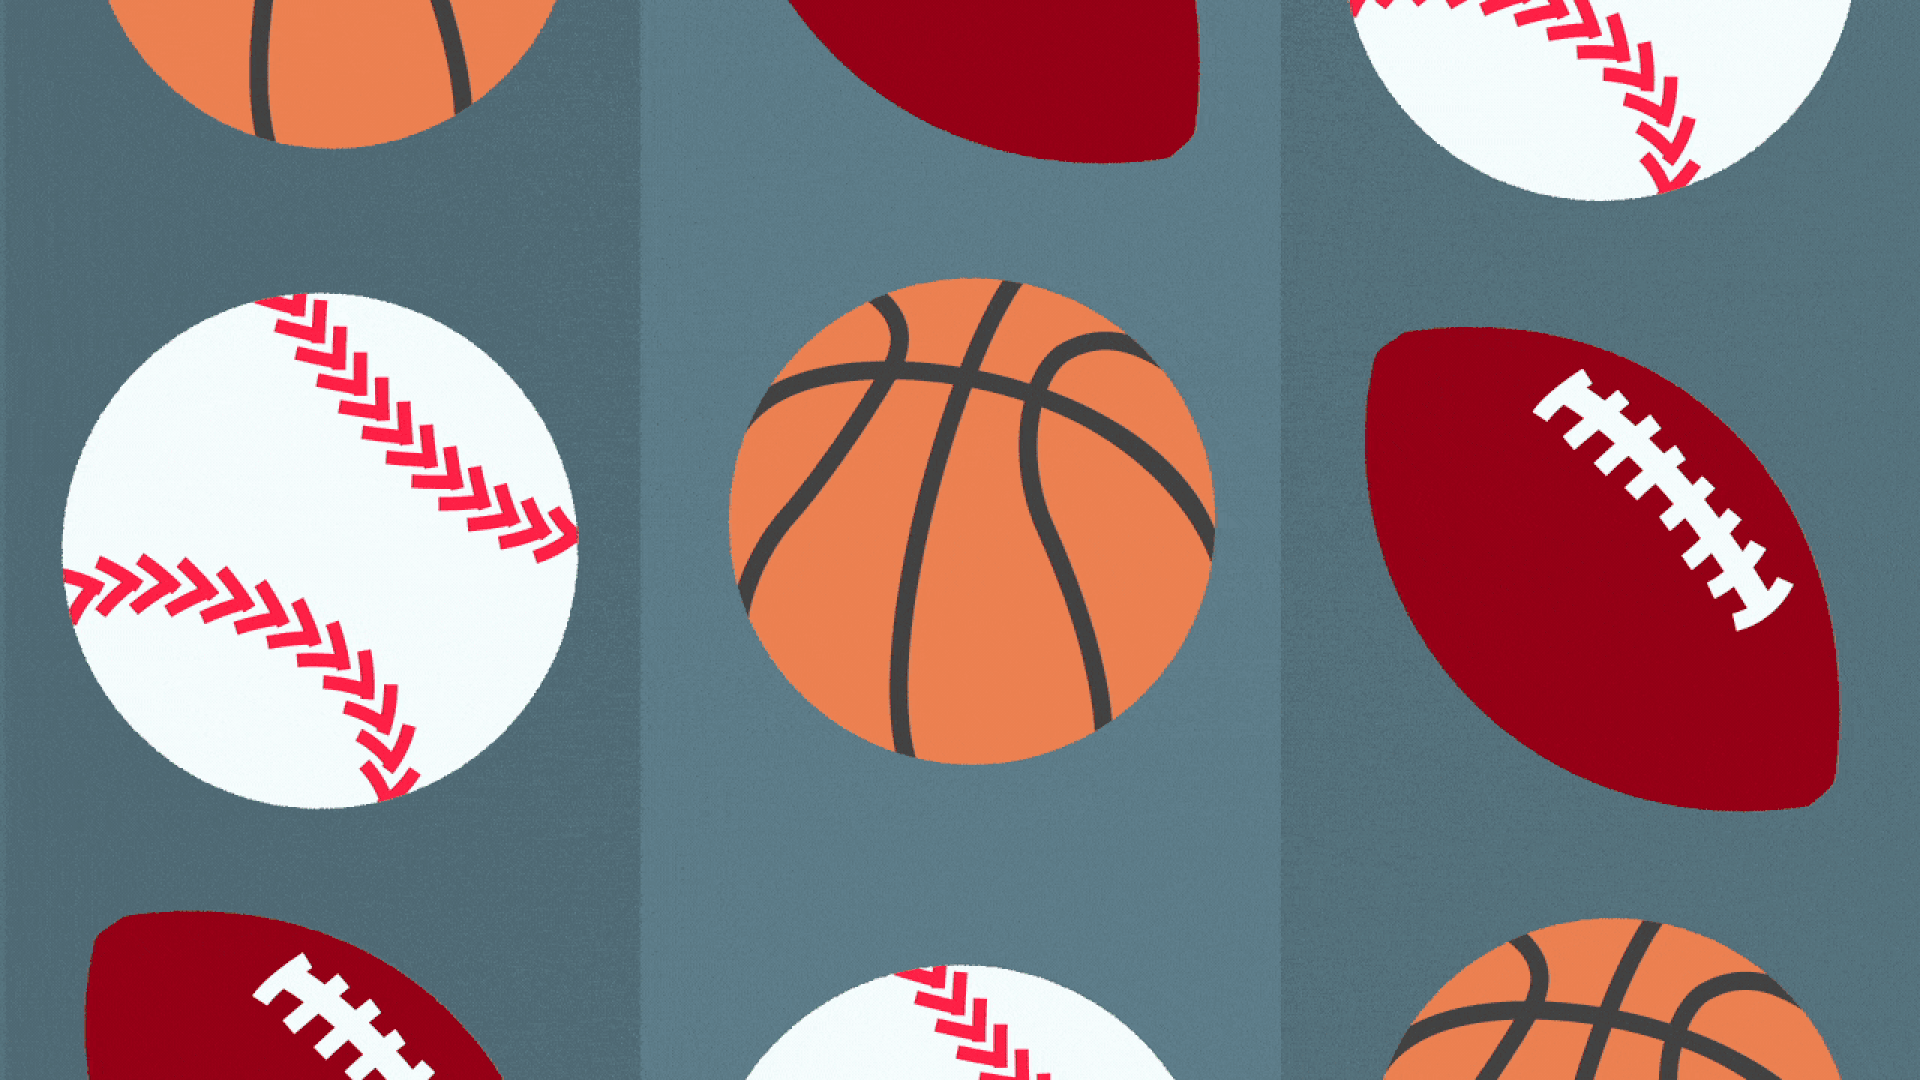 An illustration of a slot machine featuring basketball, baseball, and football, ending in three dollar signs.